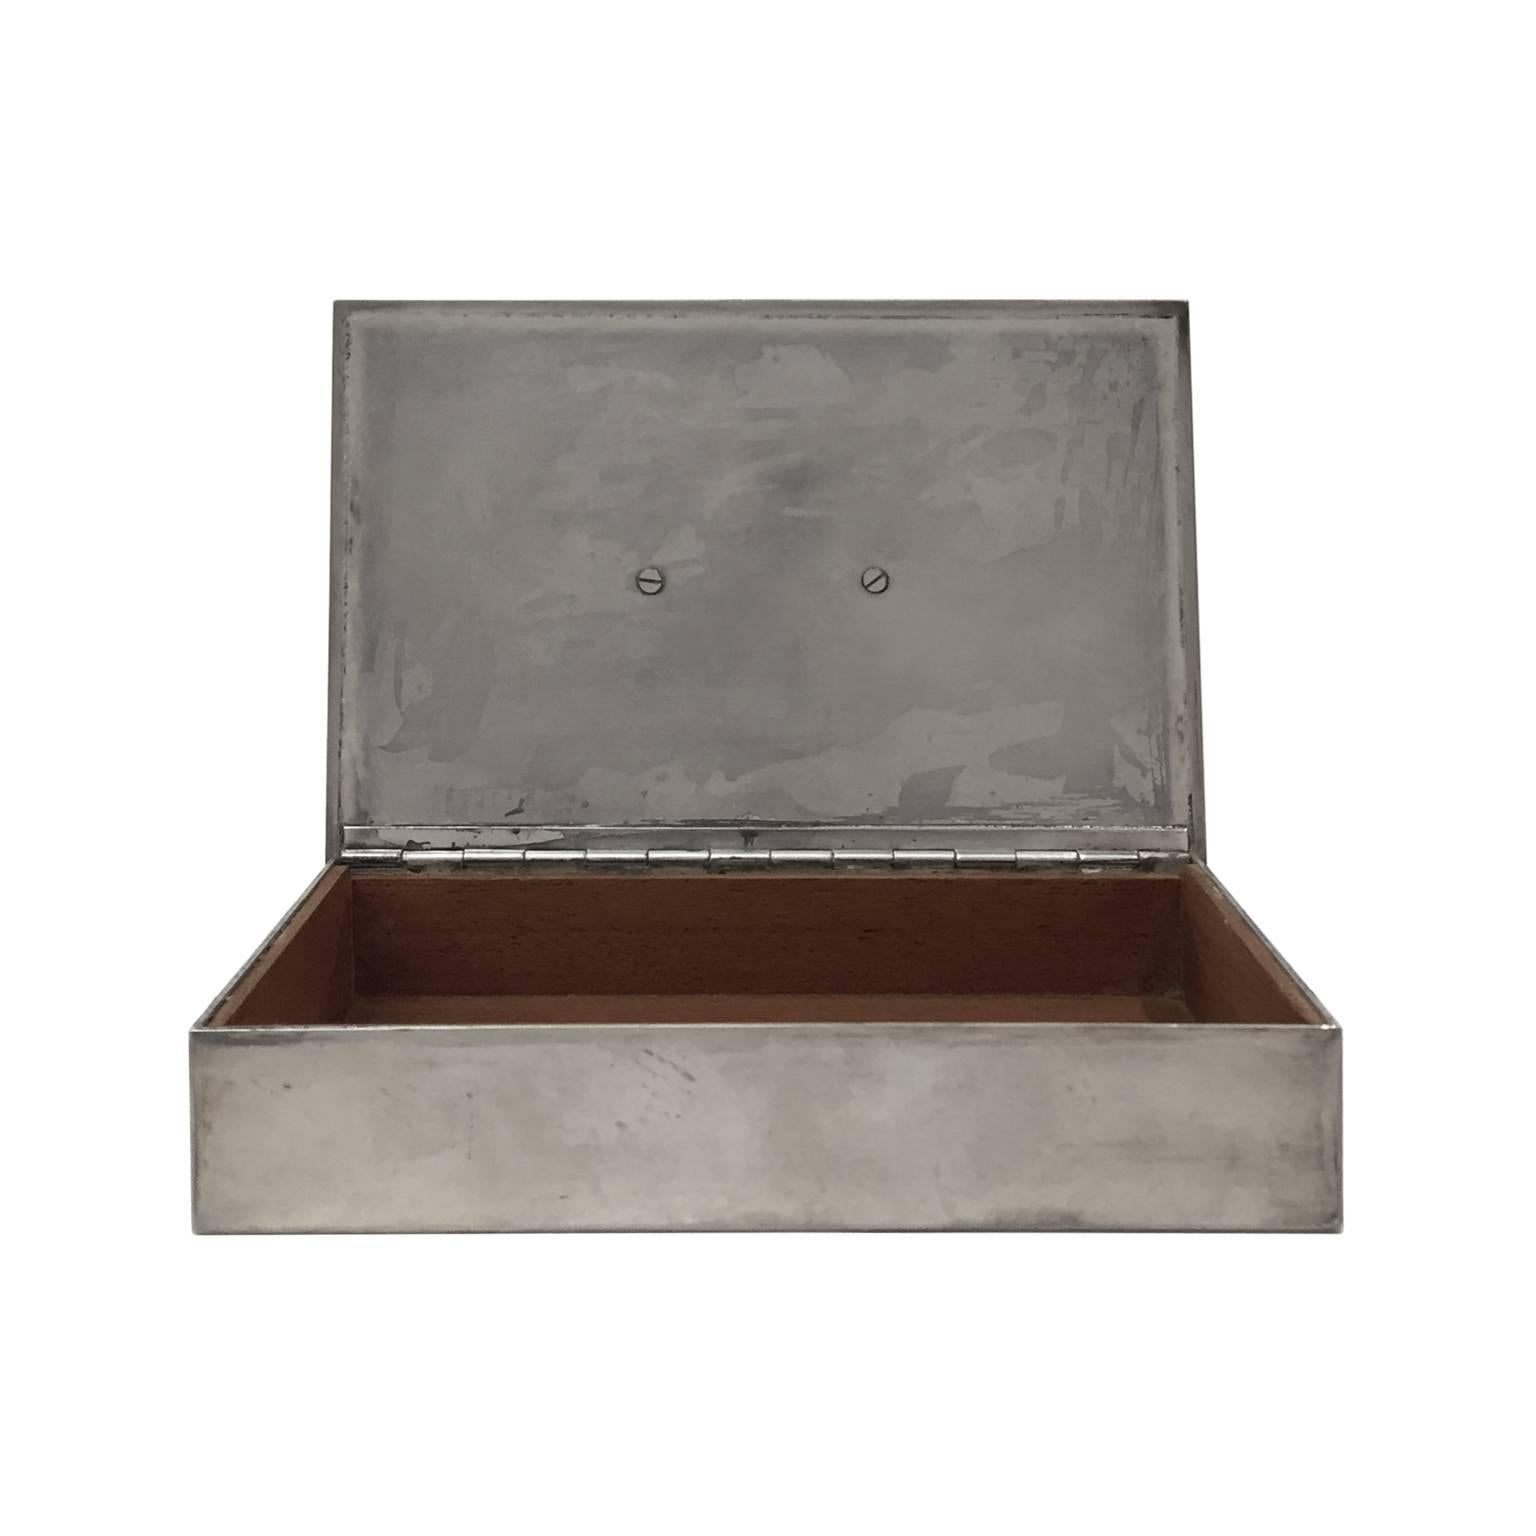 Late 20th Century 1970s, French Rectangular Silver Box with Coin Lid Detail by Christian Dior